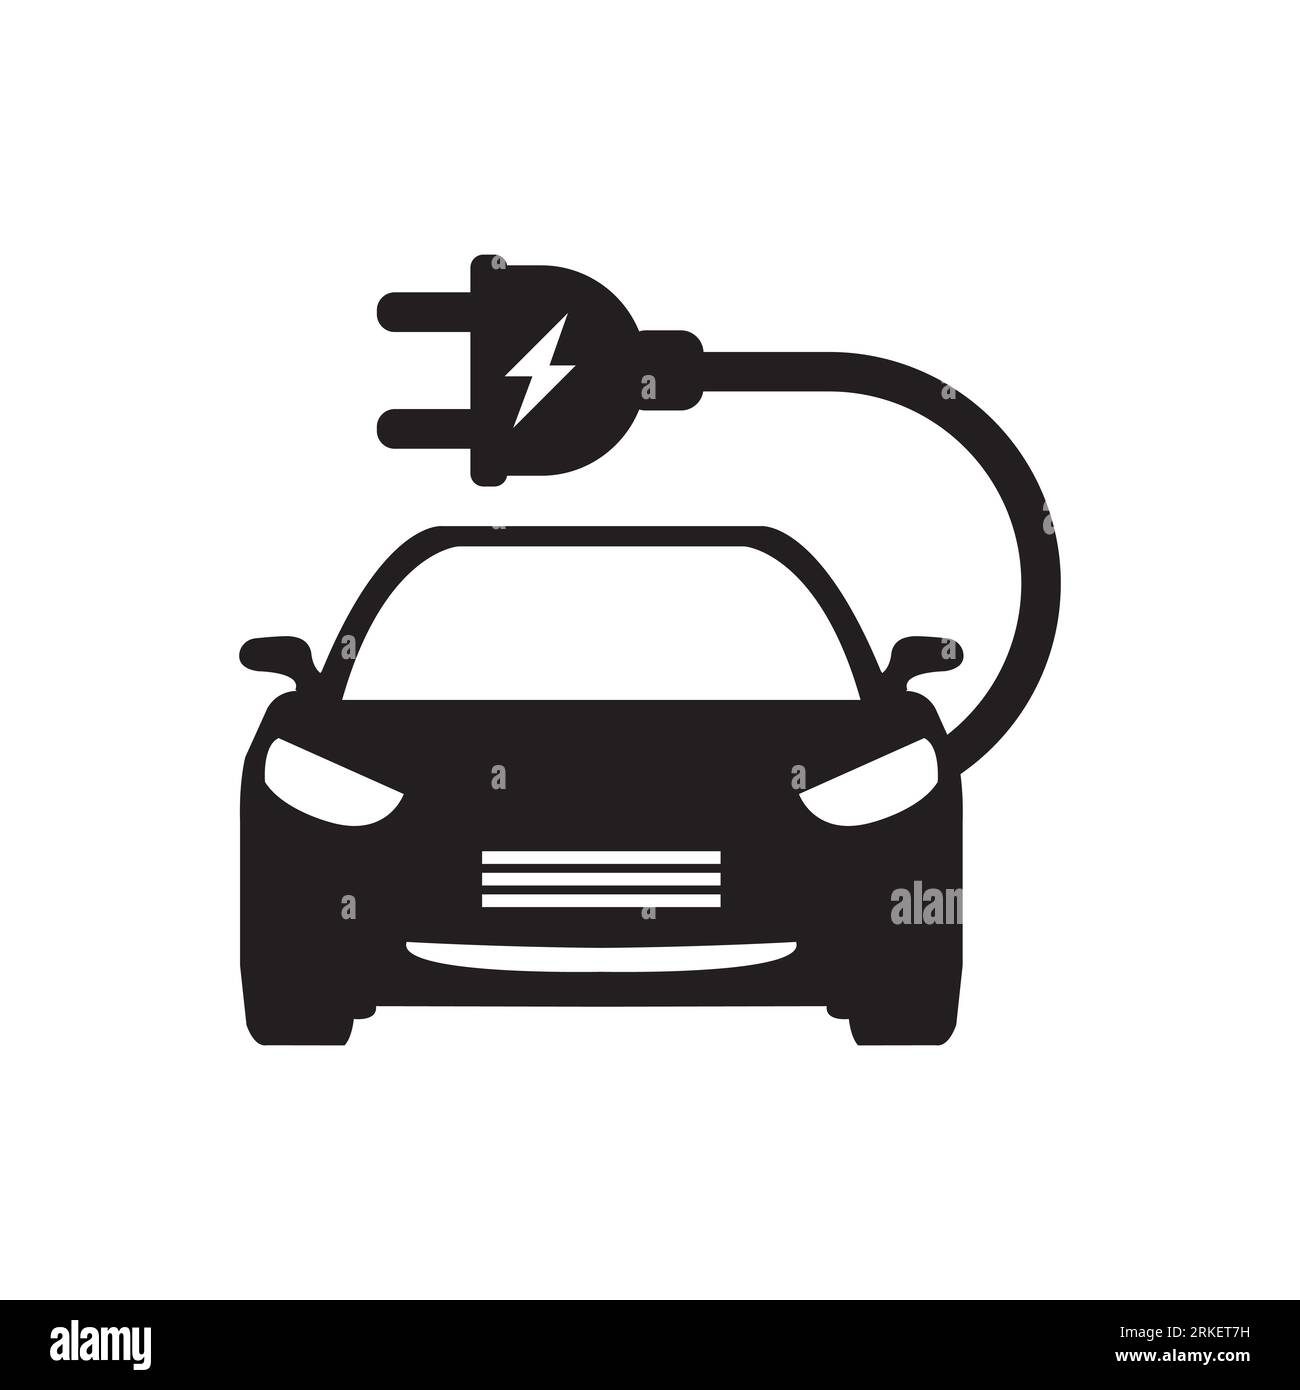 Electric car icon. EV. Electric vehicle. Charging station. Vector icon isolated on white background. Stock Vector